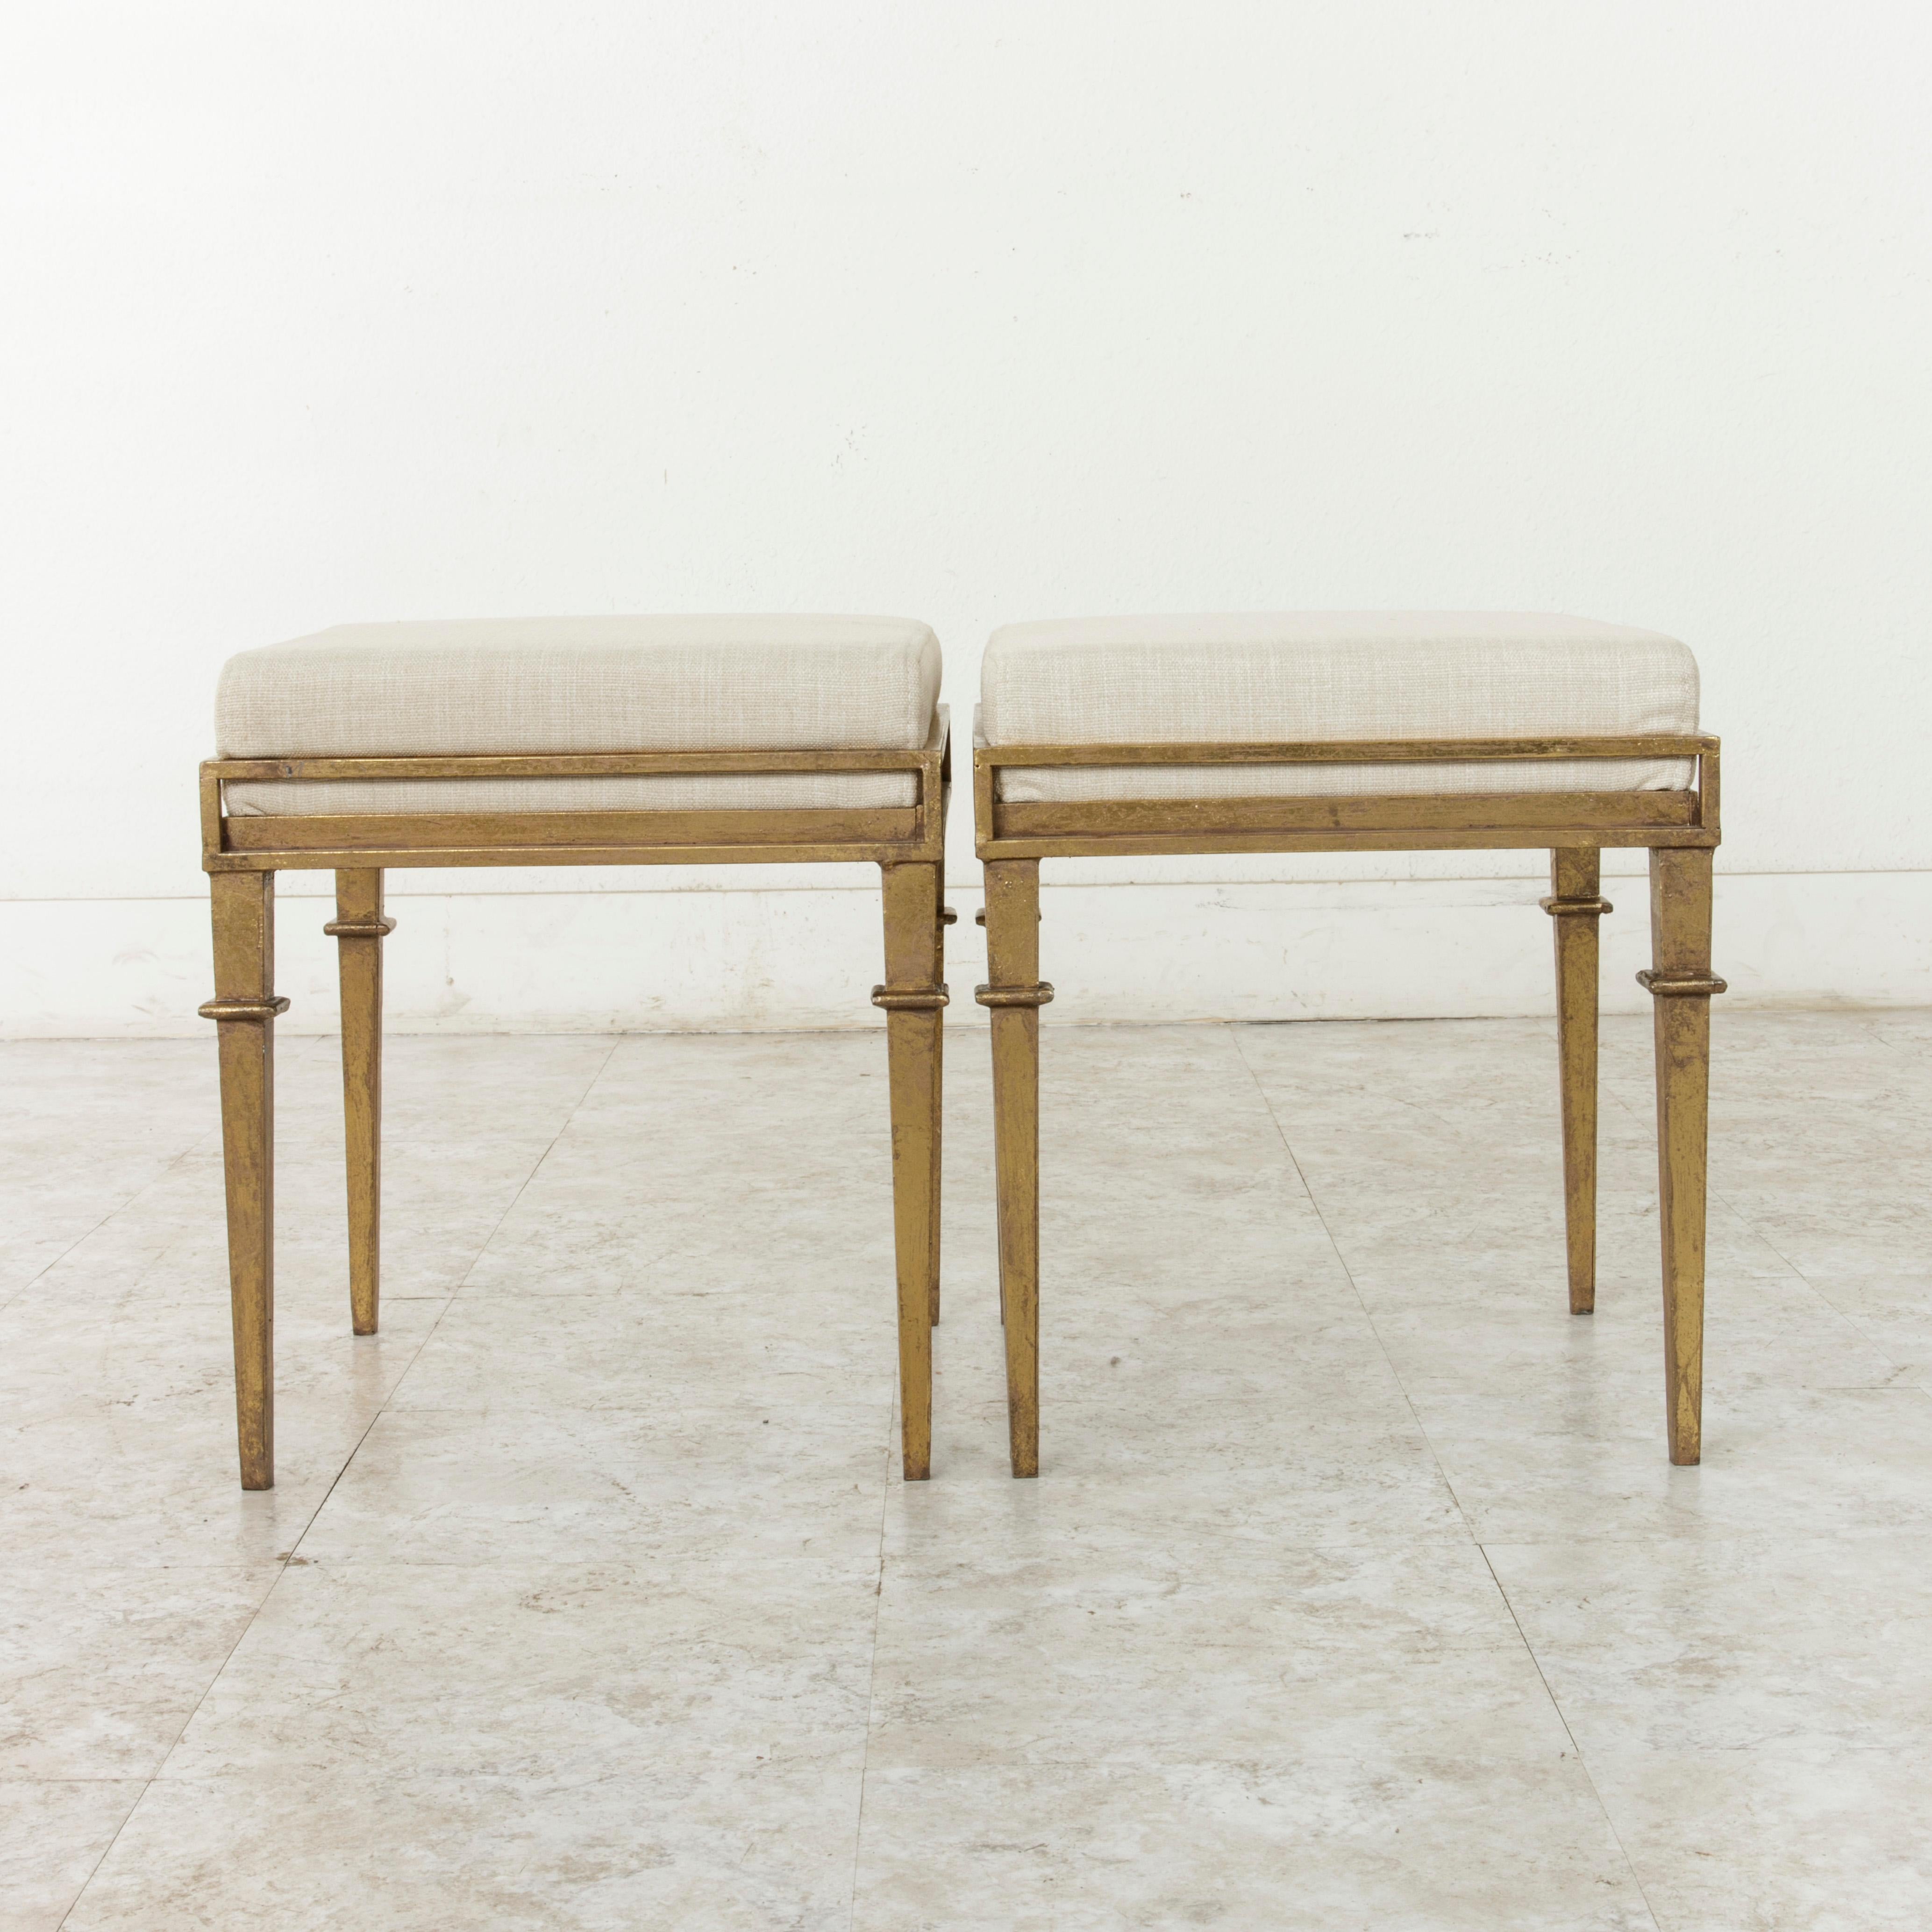 Gilt Pair of French Gilded Iron Banquettes or Benches with Linen Upholstered Cushions